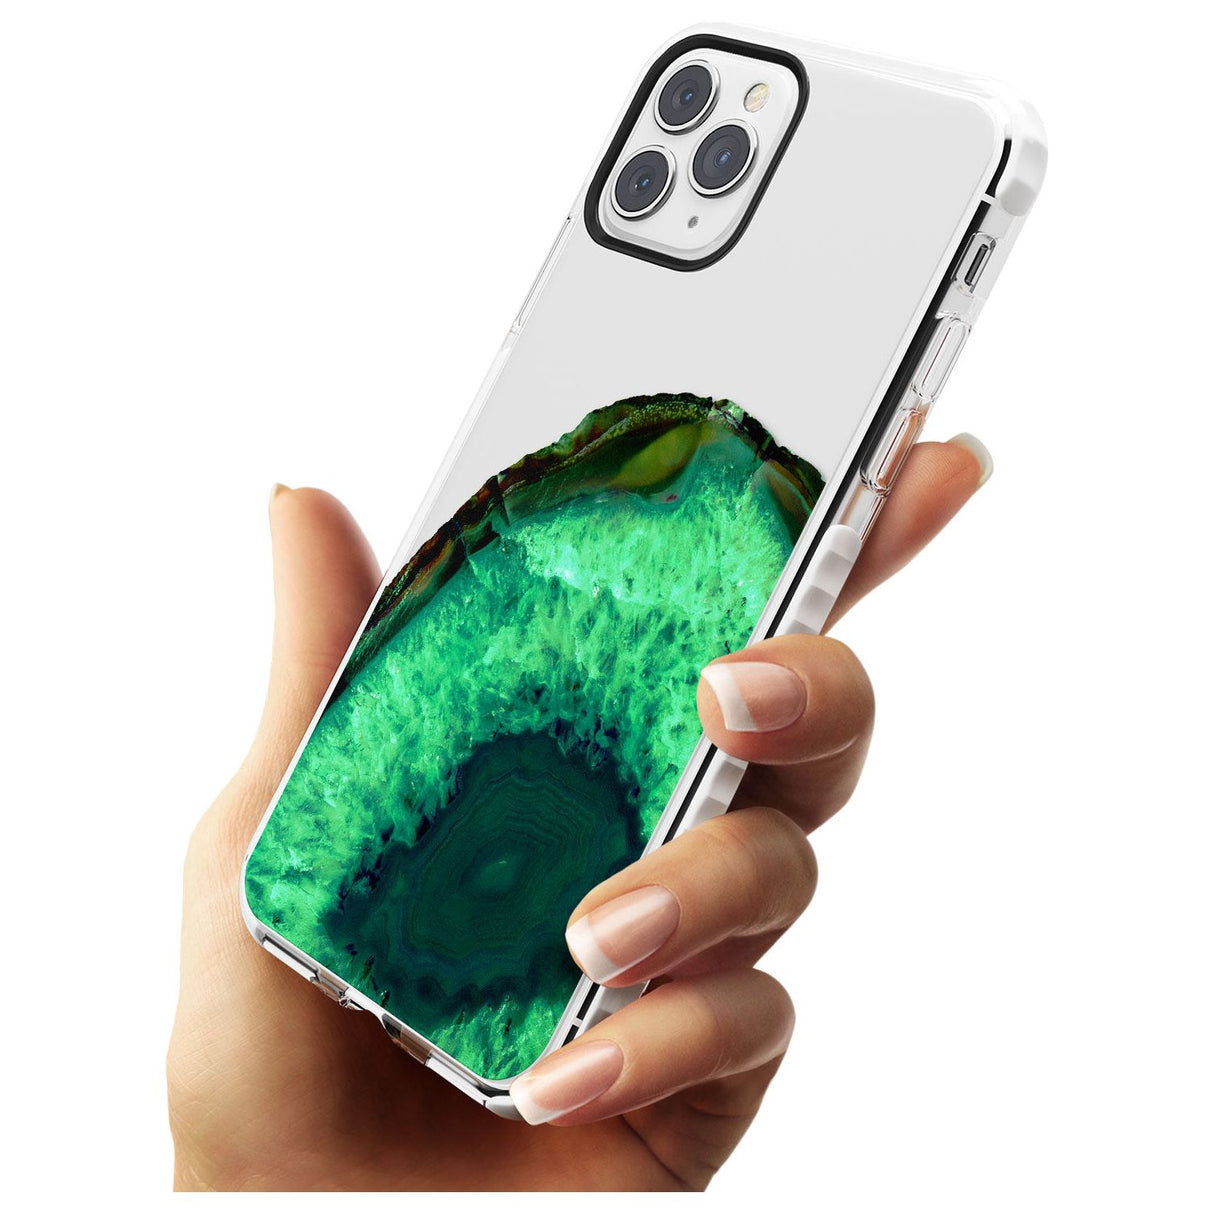 Emerald Green Gemstone Crystal Clear Design Impact Phone Case for iPhone 11 Pro Max